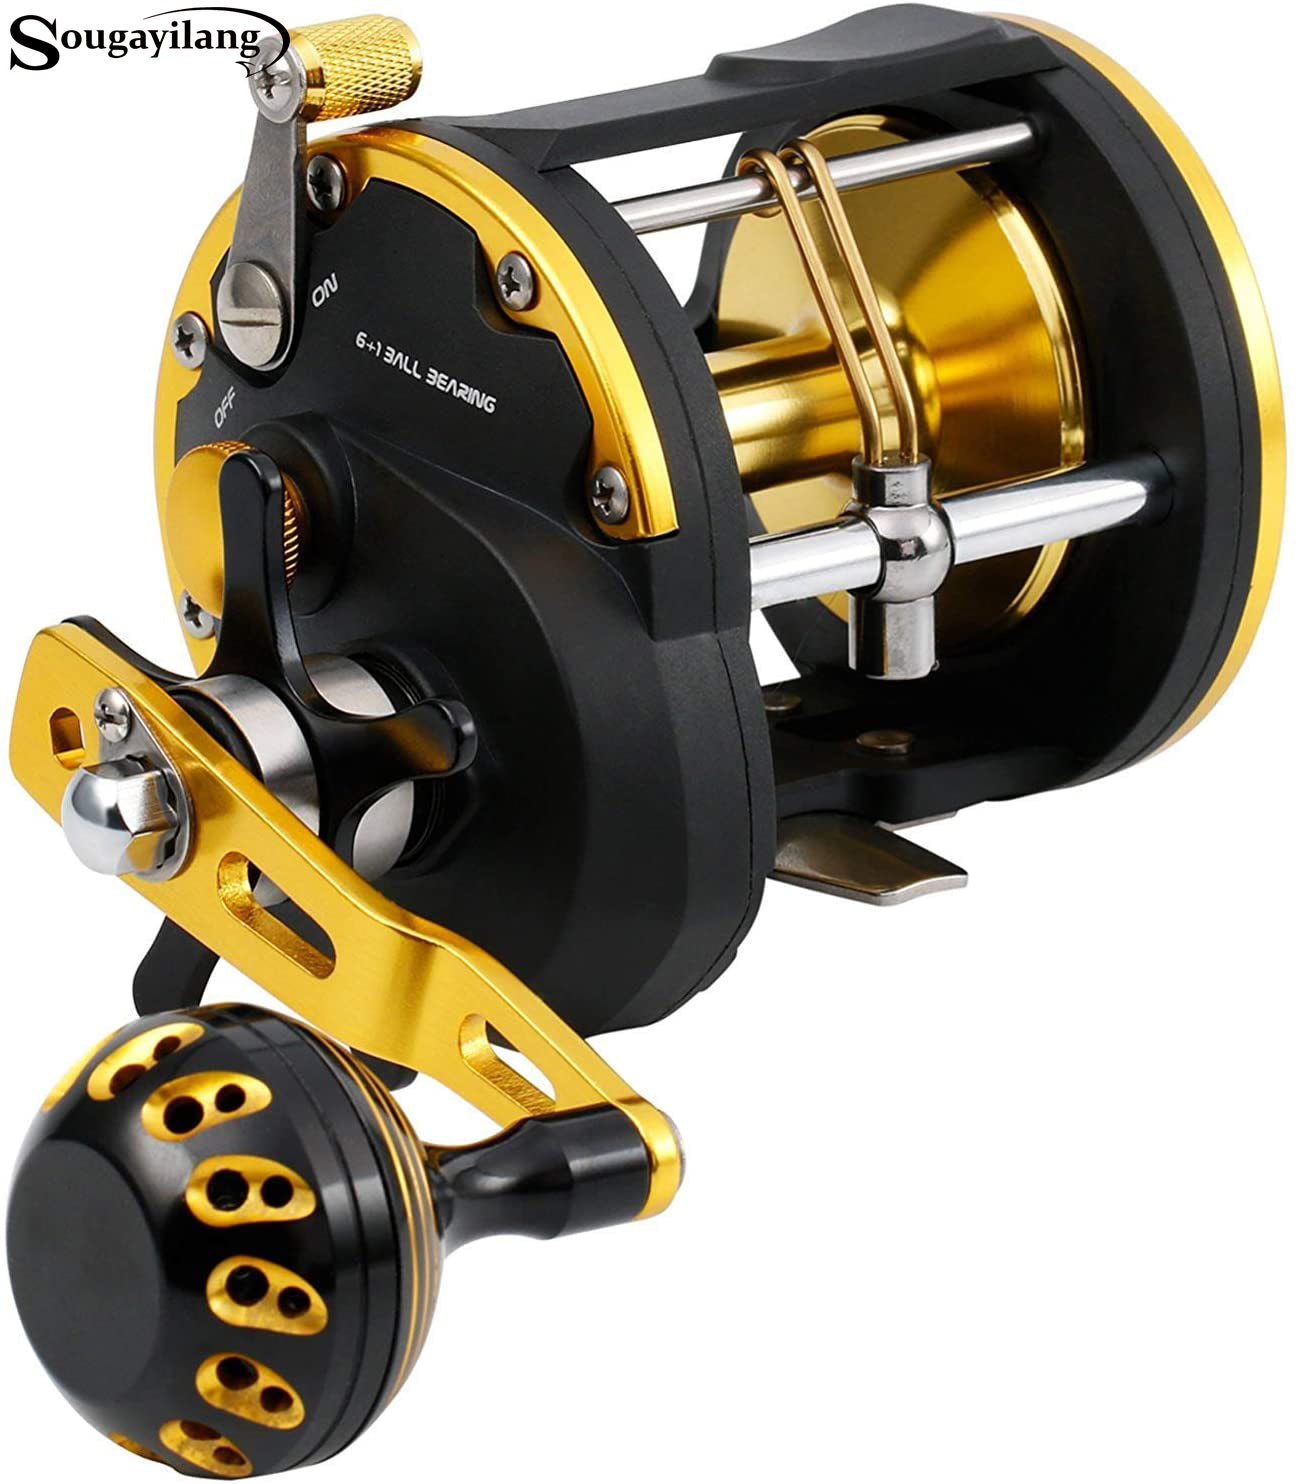  Burning Shark Fishing Reel Round Baitcasting Reel, Smooth  Powerful Line Counter Reel, Saltwater Inshore Surf Trolling Reel,  Conventional Reel for Catfish, Musky, Bass, Pike- ECTC15R : Sports &  Outdoors